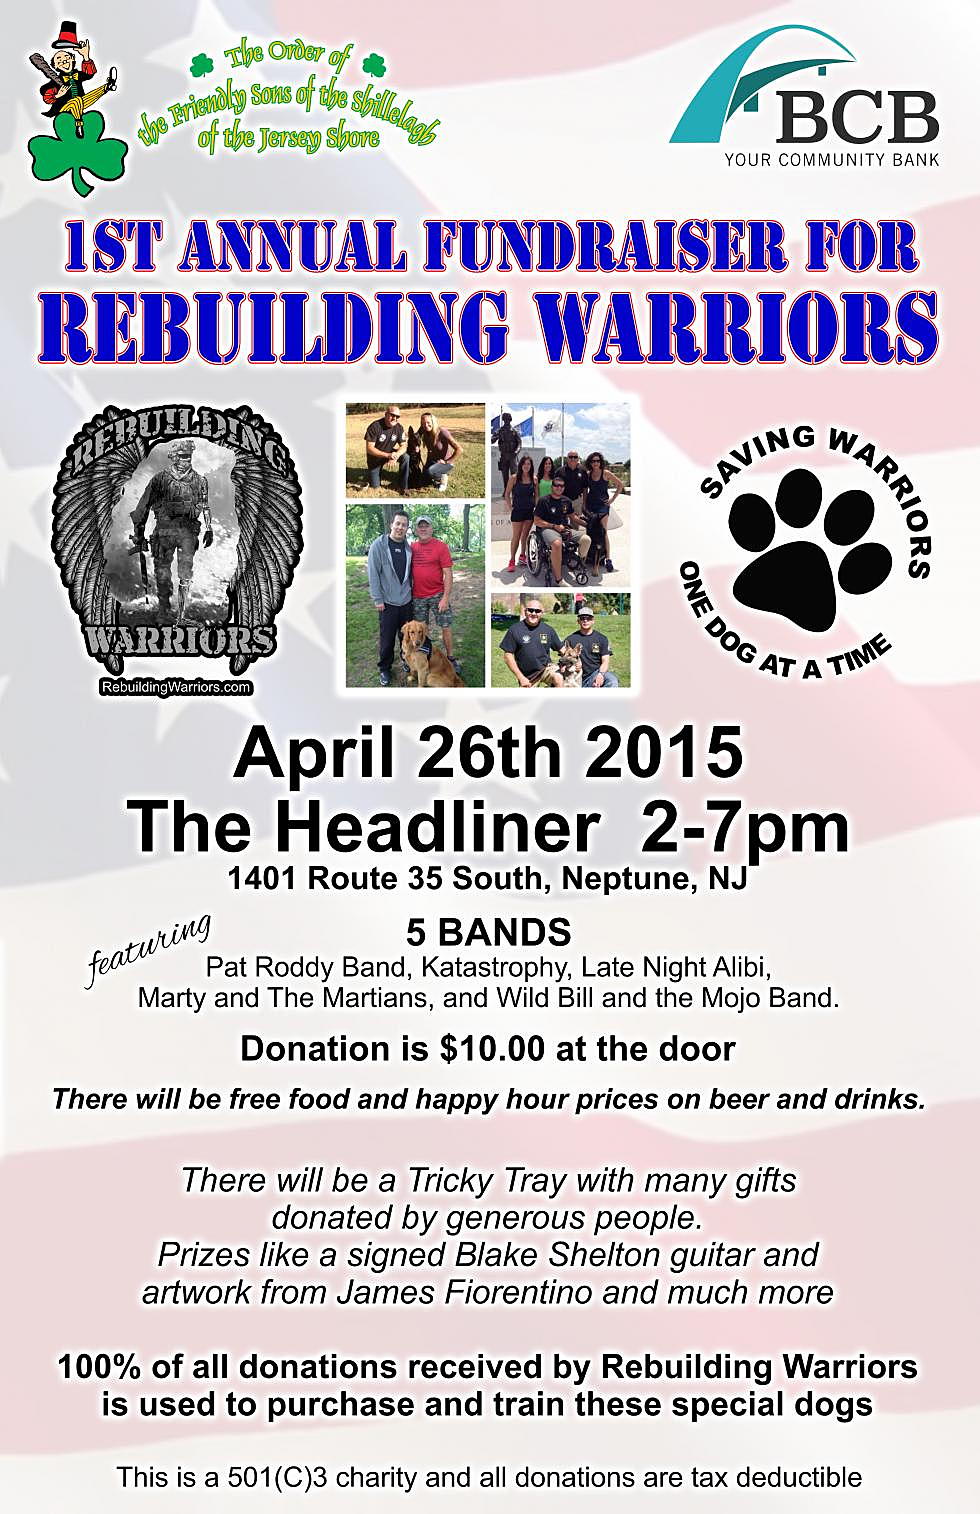 Help Rebuilding Warriors provide service dogs to veterans in need